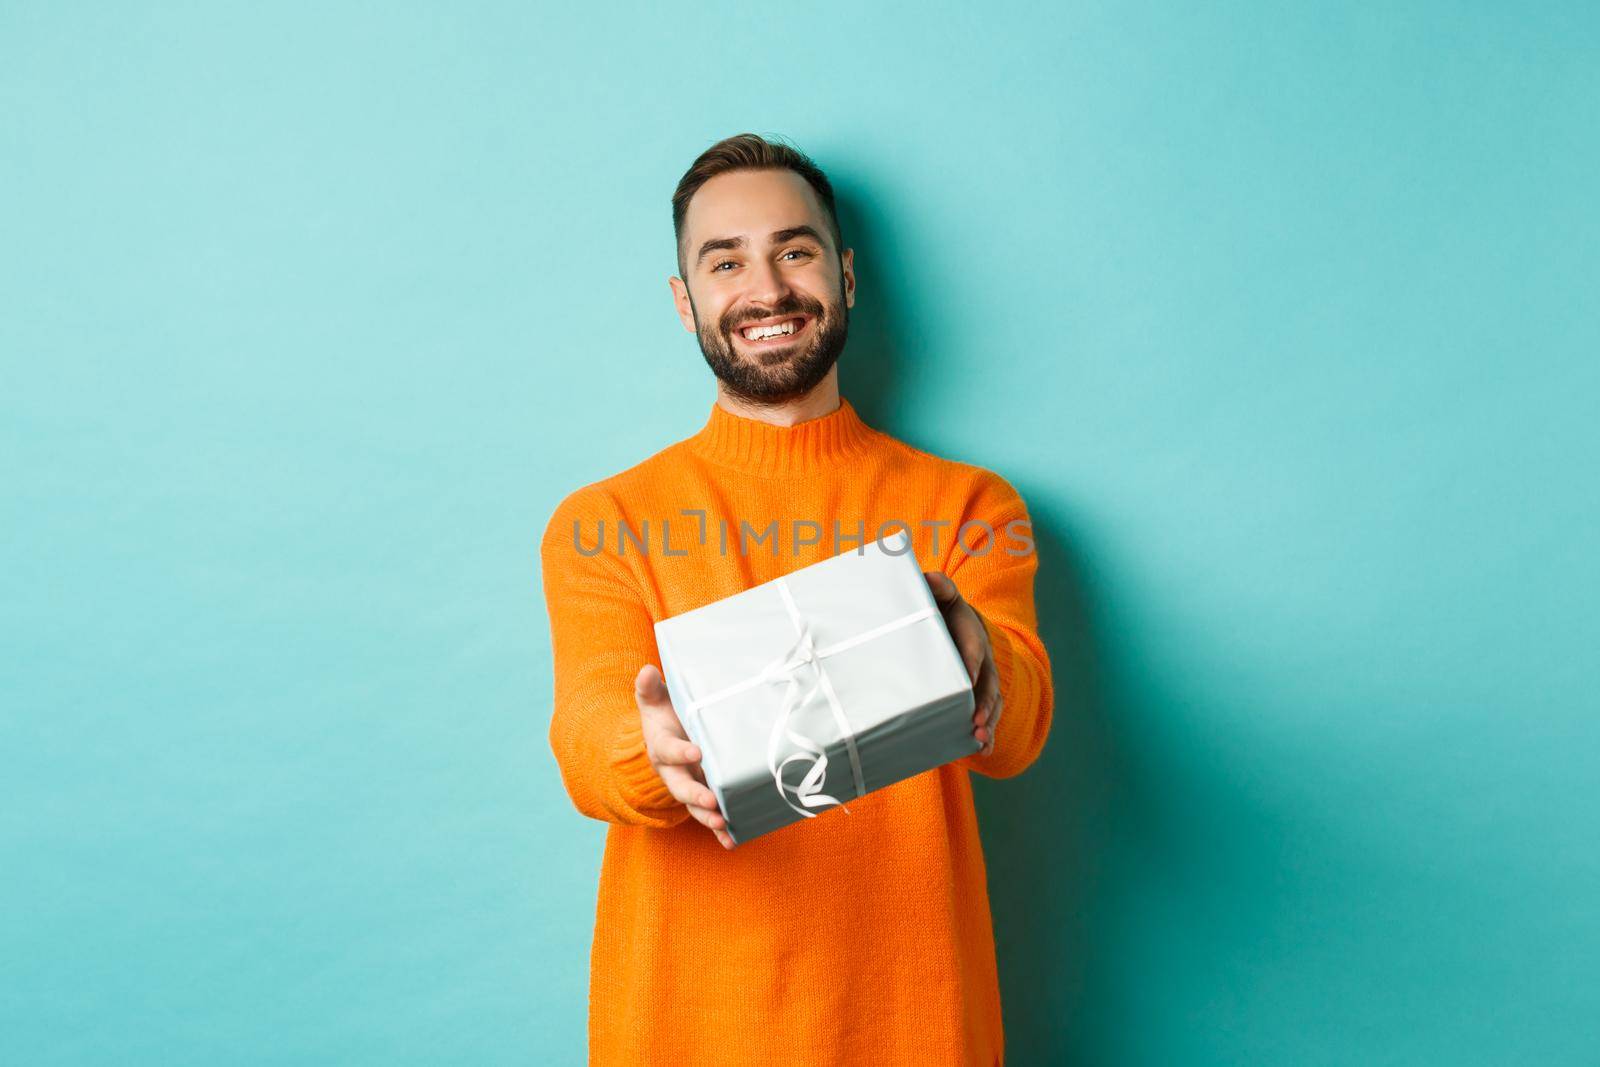 Holidays and celebration concept. Happy man giving you a gift, extending hand with present and smiling, standing over turquoise background.